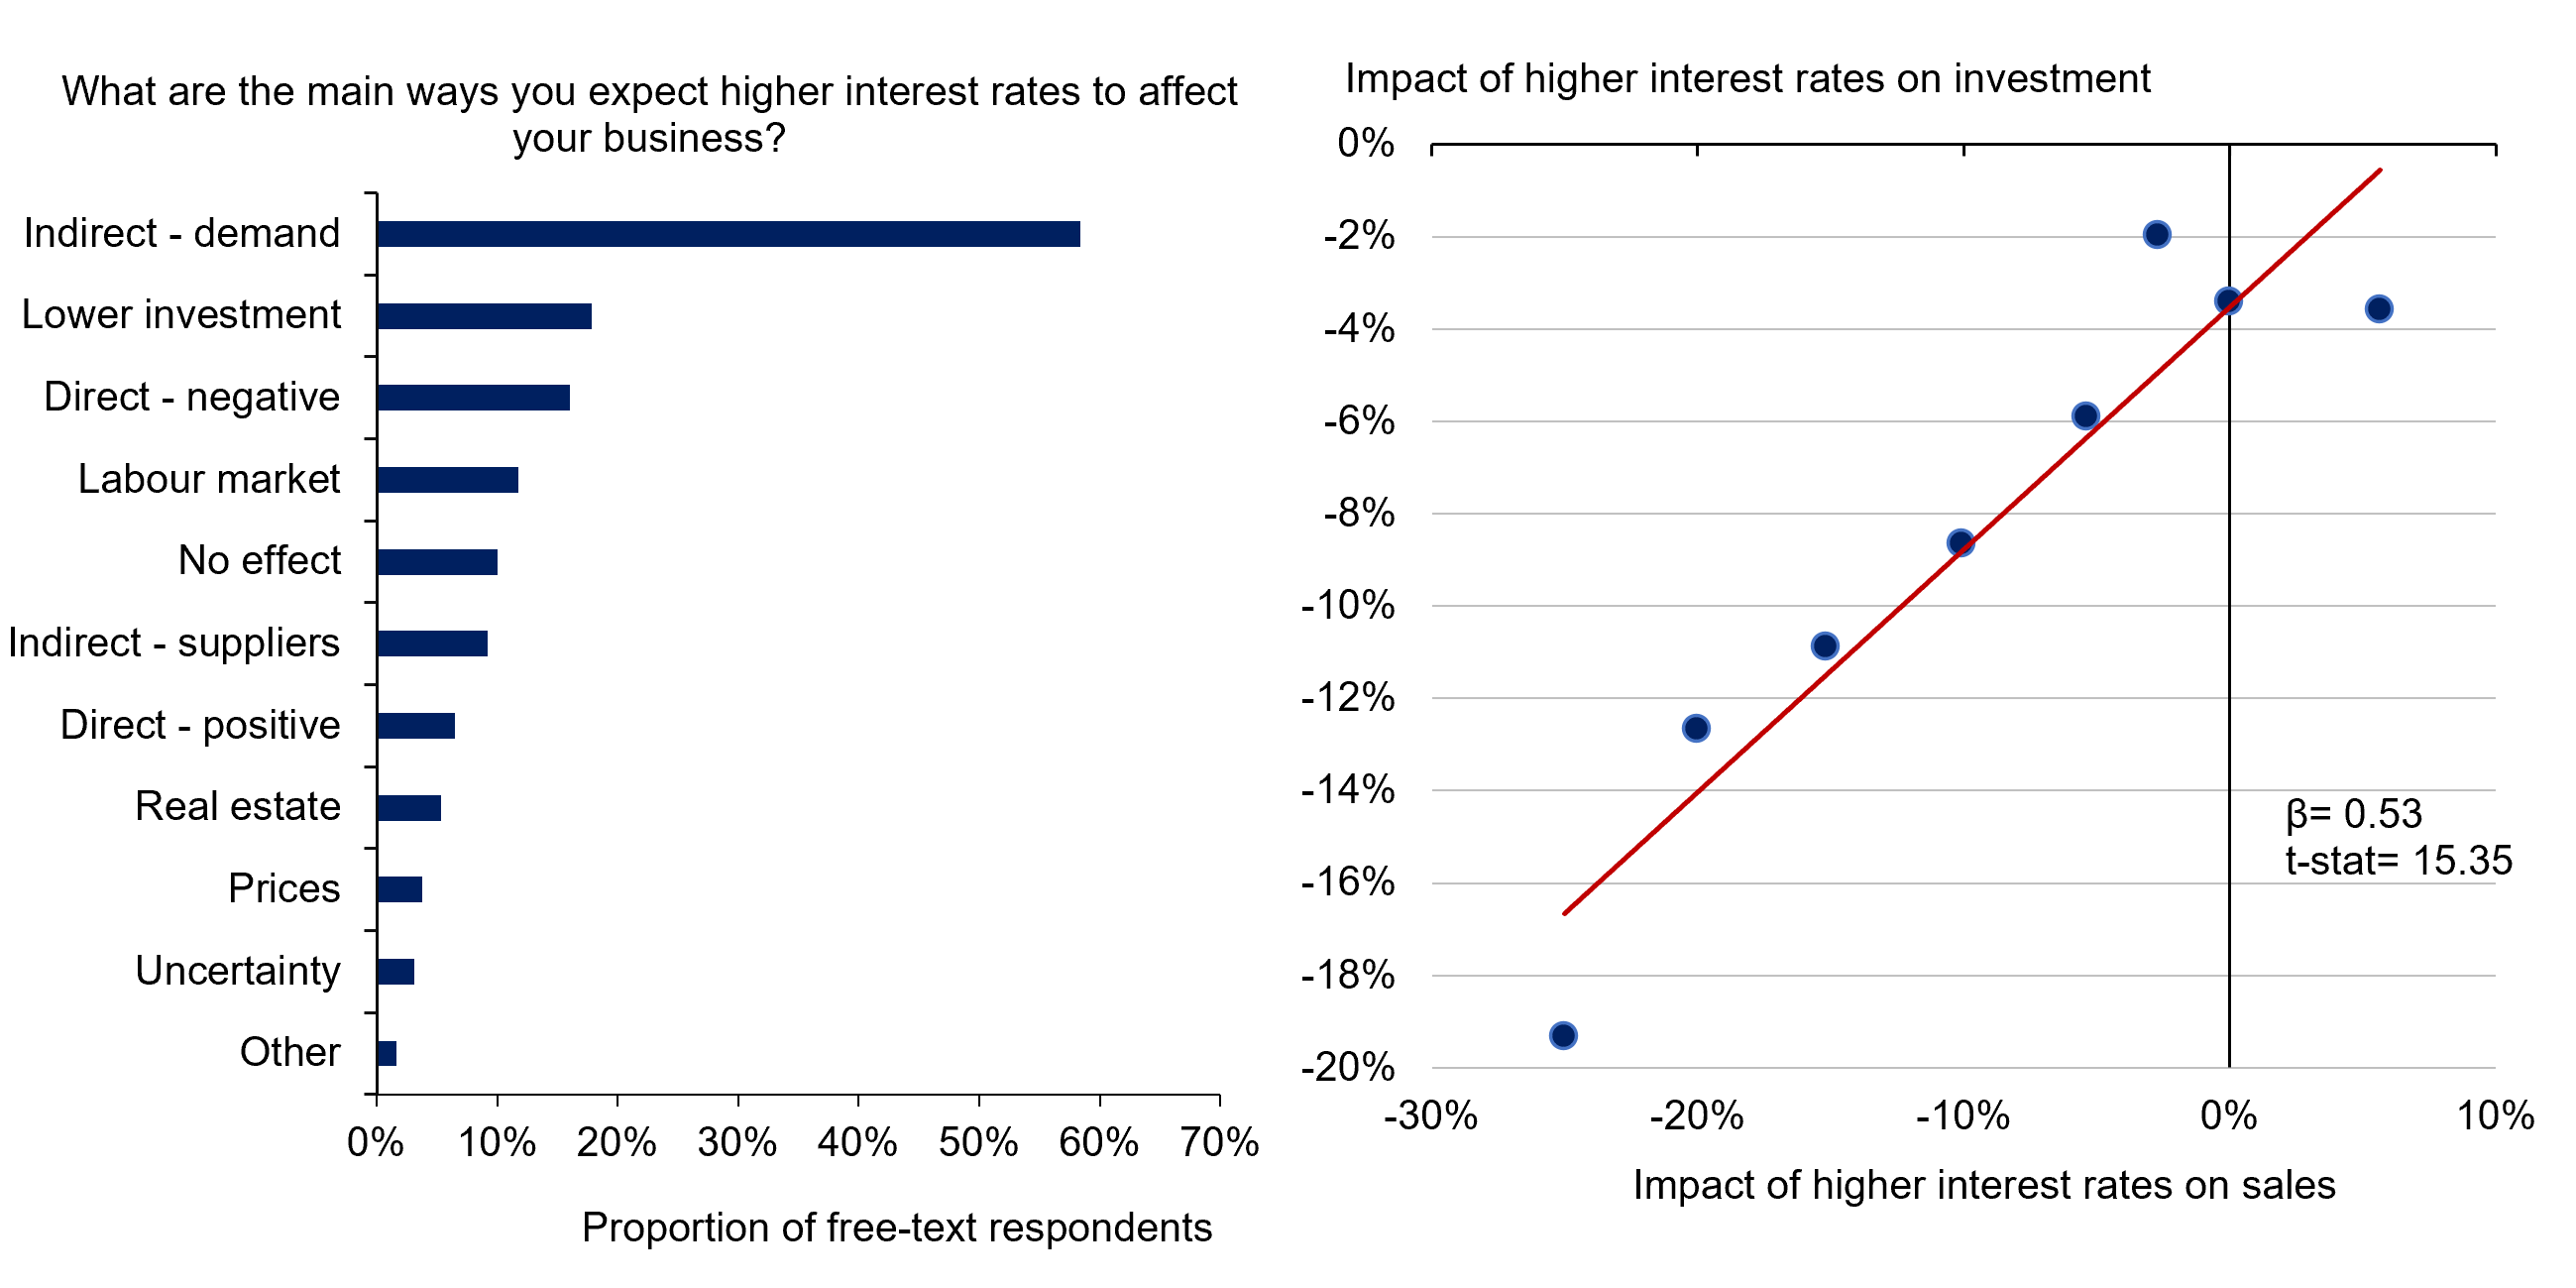 Figure 2 Impact of higher interest rates on firm sales and capital expenditures (right panel) and the proportion of free-text survey responses grouped by theme (left panel)